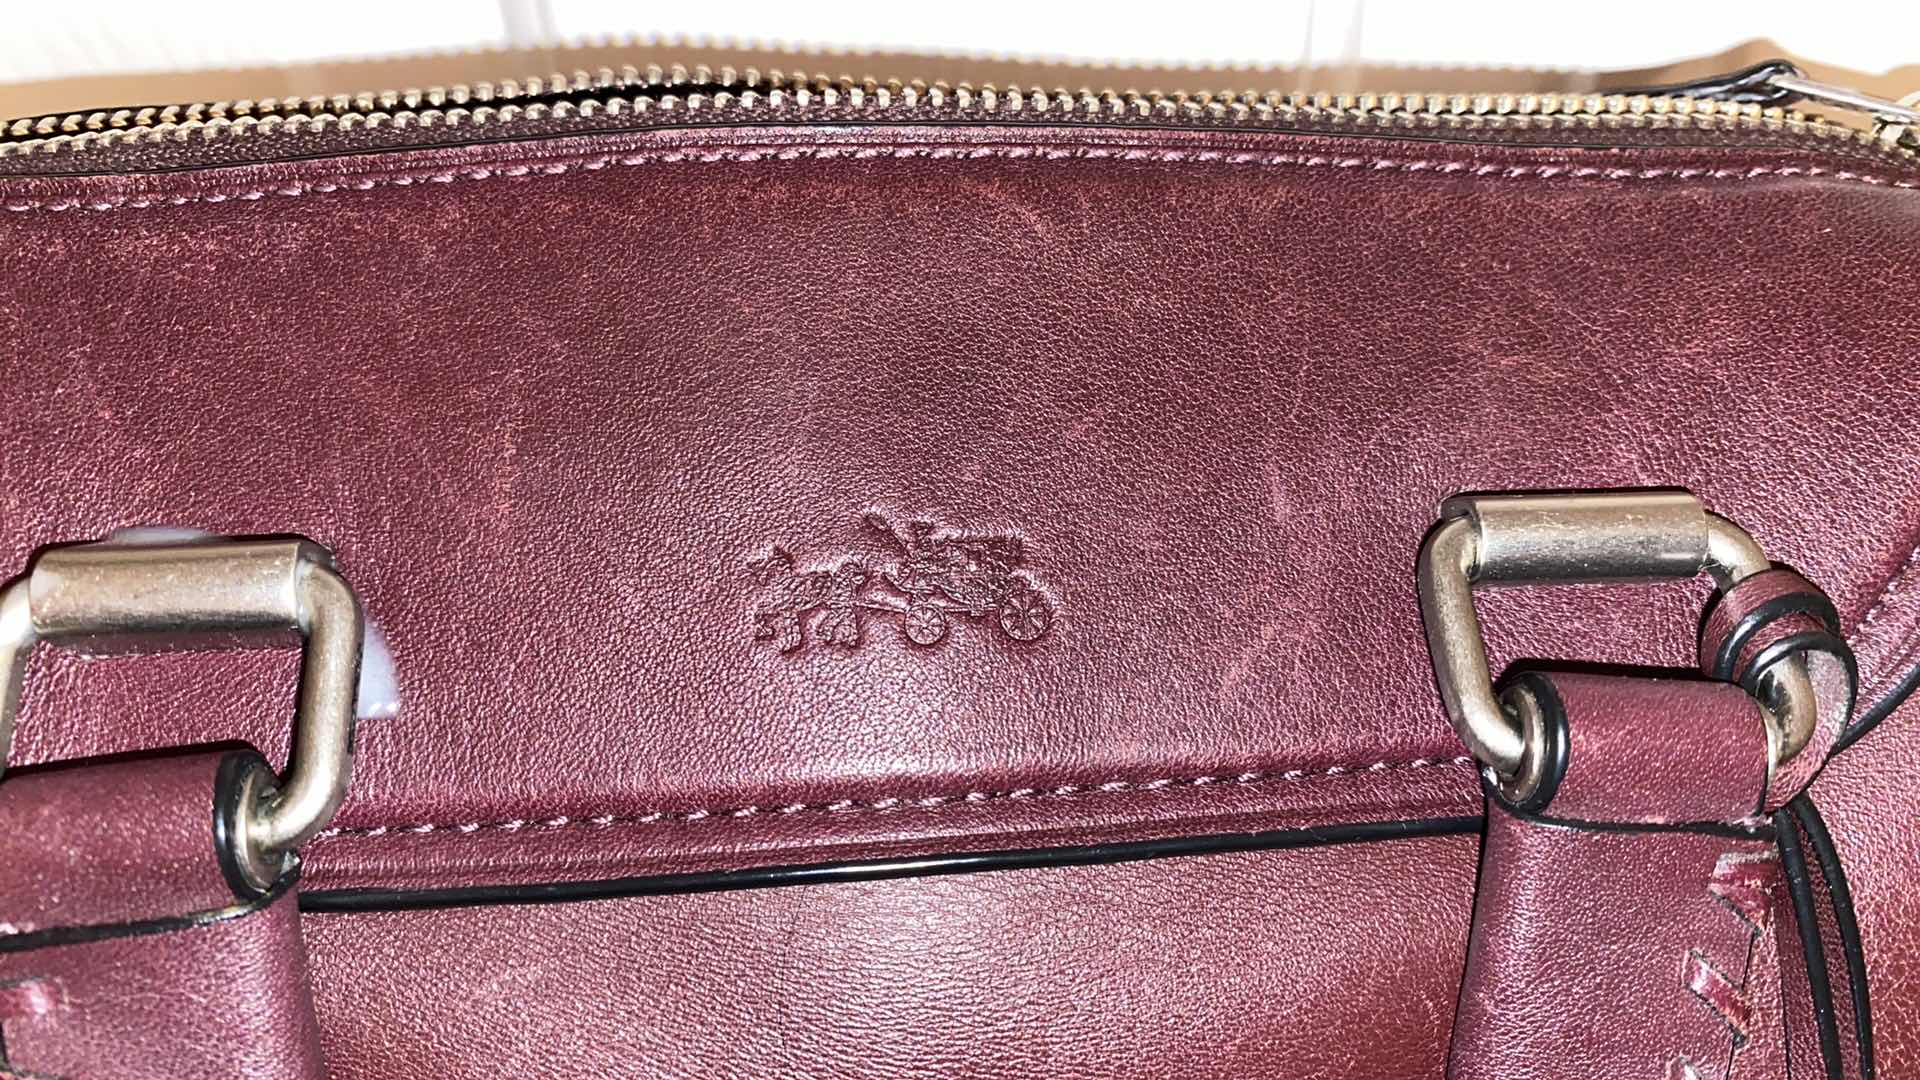 Photo 3 of $869 AUTHENTIC COACH ACE SATCHEL IN BURGUNDY WITH STRAP, WHIPSTITCHED HANDLES AND GUNMETAL HARDWARE INCLUDES DUSTBAG- NON RETURABLE - FINAL SALE